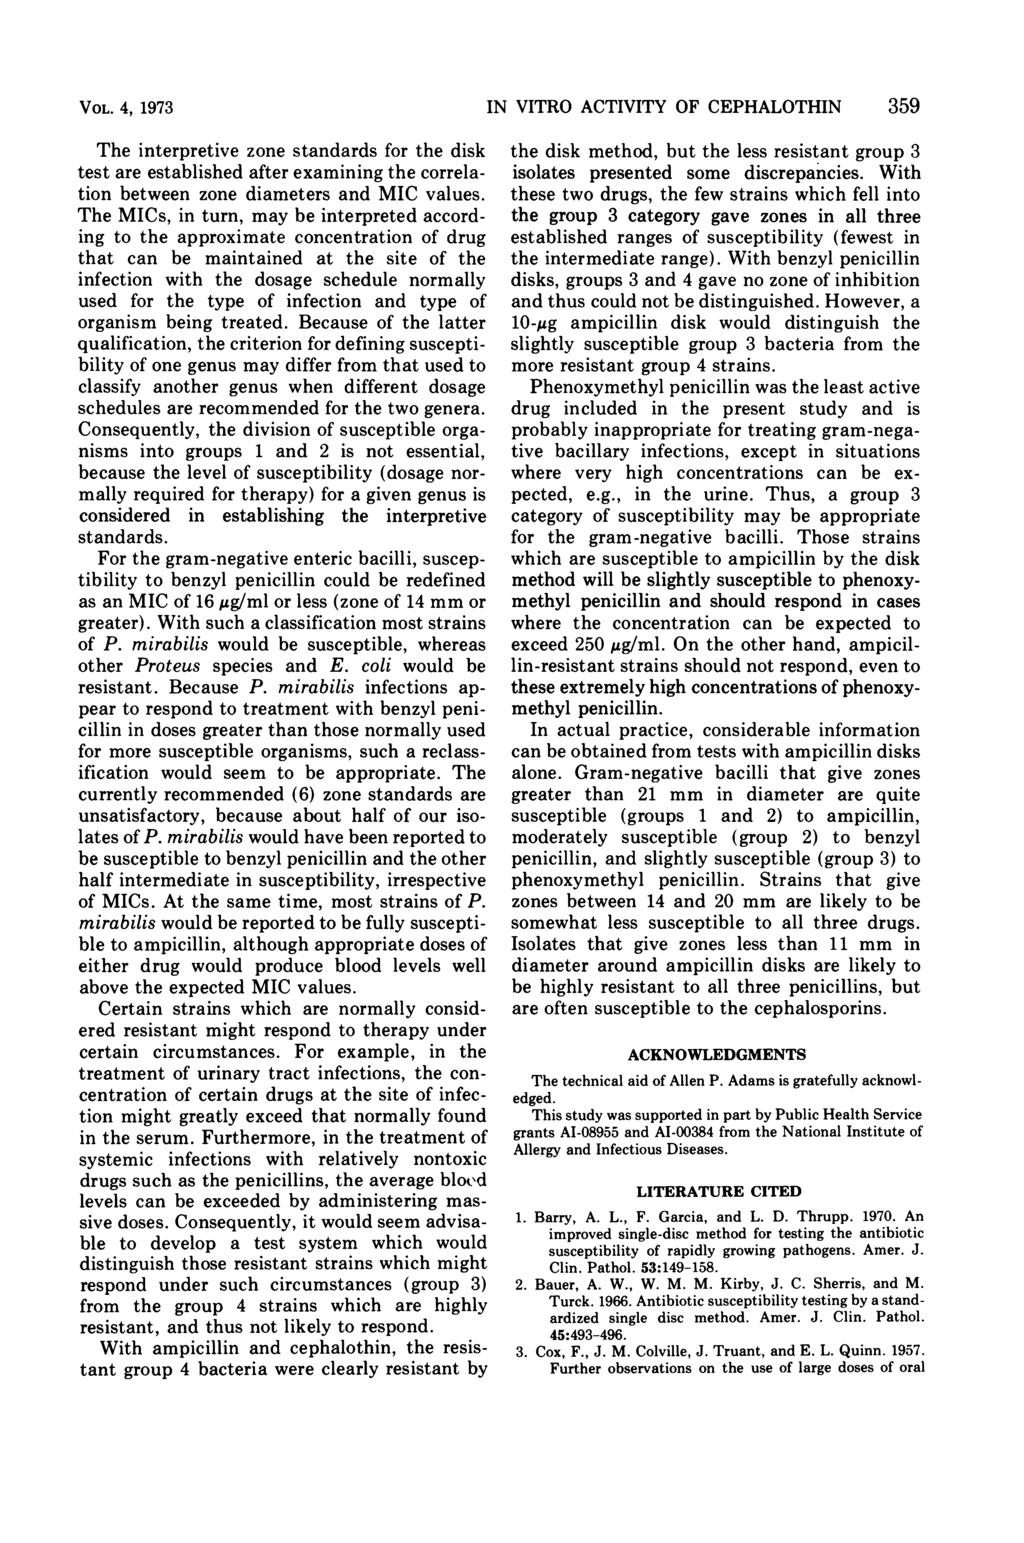 VOL. 4, 1973 IN VITRO ACTIVITY OF CEPHALOTHIN 359 The interpretive zone standards for the disk test are established after examining the correlation between zone diameters and MIC values.